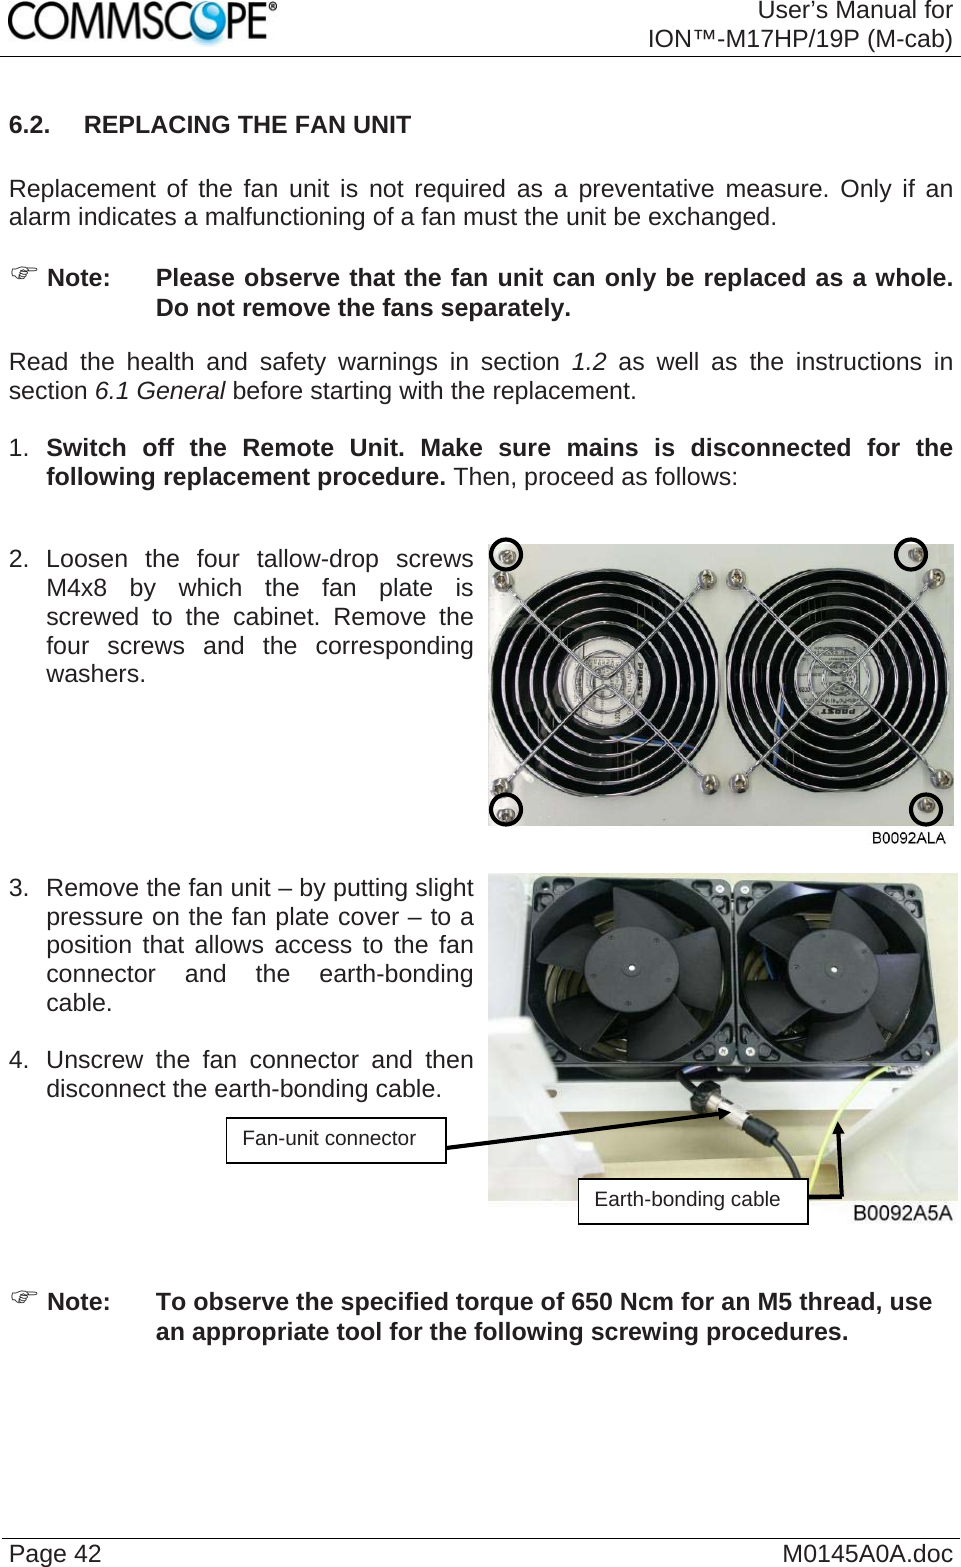  User’s Manual forION™-M17HP/19P (M-cab) Page 42  M0145A0A.doc6.2.  REPLACING THE FAN UNIT  Replacement of the fan unit is not required as a preventative measure. Only if an alarm indicates a malfunctioning of a fan must the unit be exchanged. ) Note:  Please observe that the fan unit can only be replaced as a whole. Do not remove the fans separately. Read the health and safety warnings in section 1.2 as well as the instructions in section 6.1 General before starting with the replacement.   1.  Switch off the Remote Unit. Make sure mains is disconnected for the following replacement procedure. Then, proceed as follows:  2. Loosen the four tallow-drop screws M4x8 by which the fan plate is screwed to the cabinet. Remove the four screws and the corresponding washers.    3.  Remove the fan unit – by putting slight pressure on the fan plate cover – to a position that allows access to the fan connector and the earth-bonding cable.   4.  Unscrew the fan connector and then disconnect the earth-bonding cable.    Fan-unit connector Earth-bonding cable ) Note:  To observe the specified torque of 650 Ncm for an M5 thread, use an appropriate tool for the following screwing procedures.  